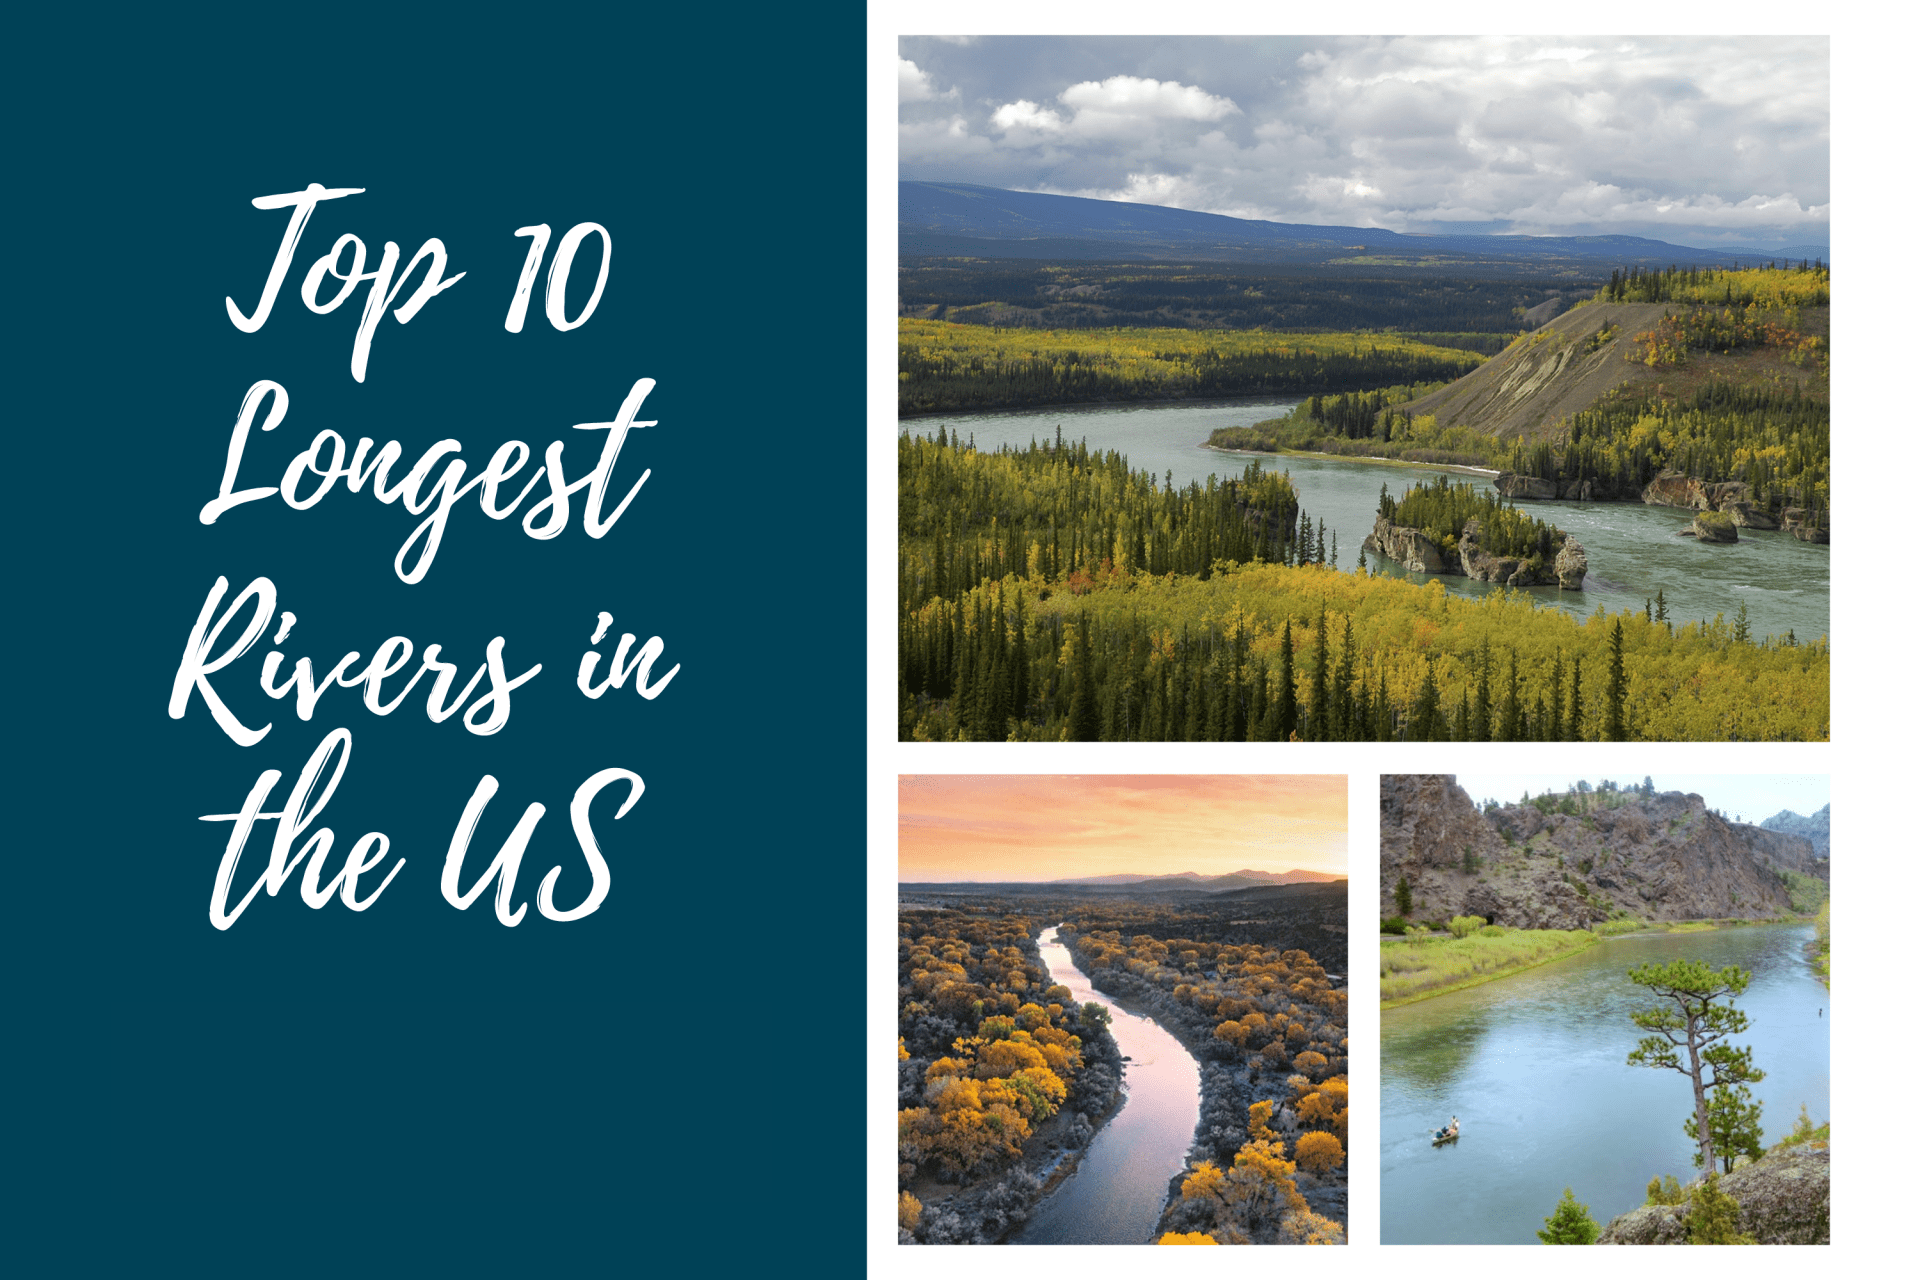 What Is The Longest River In United States